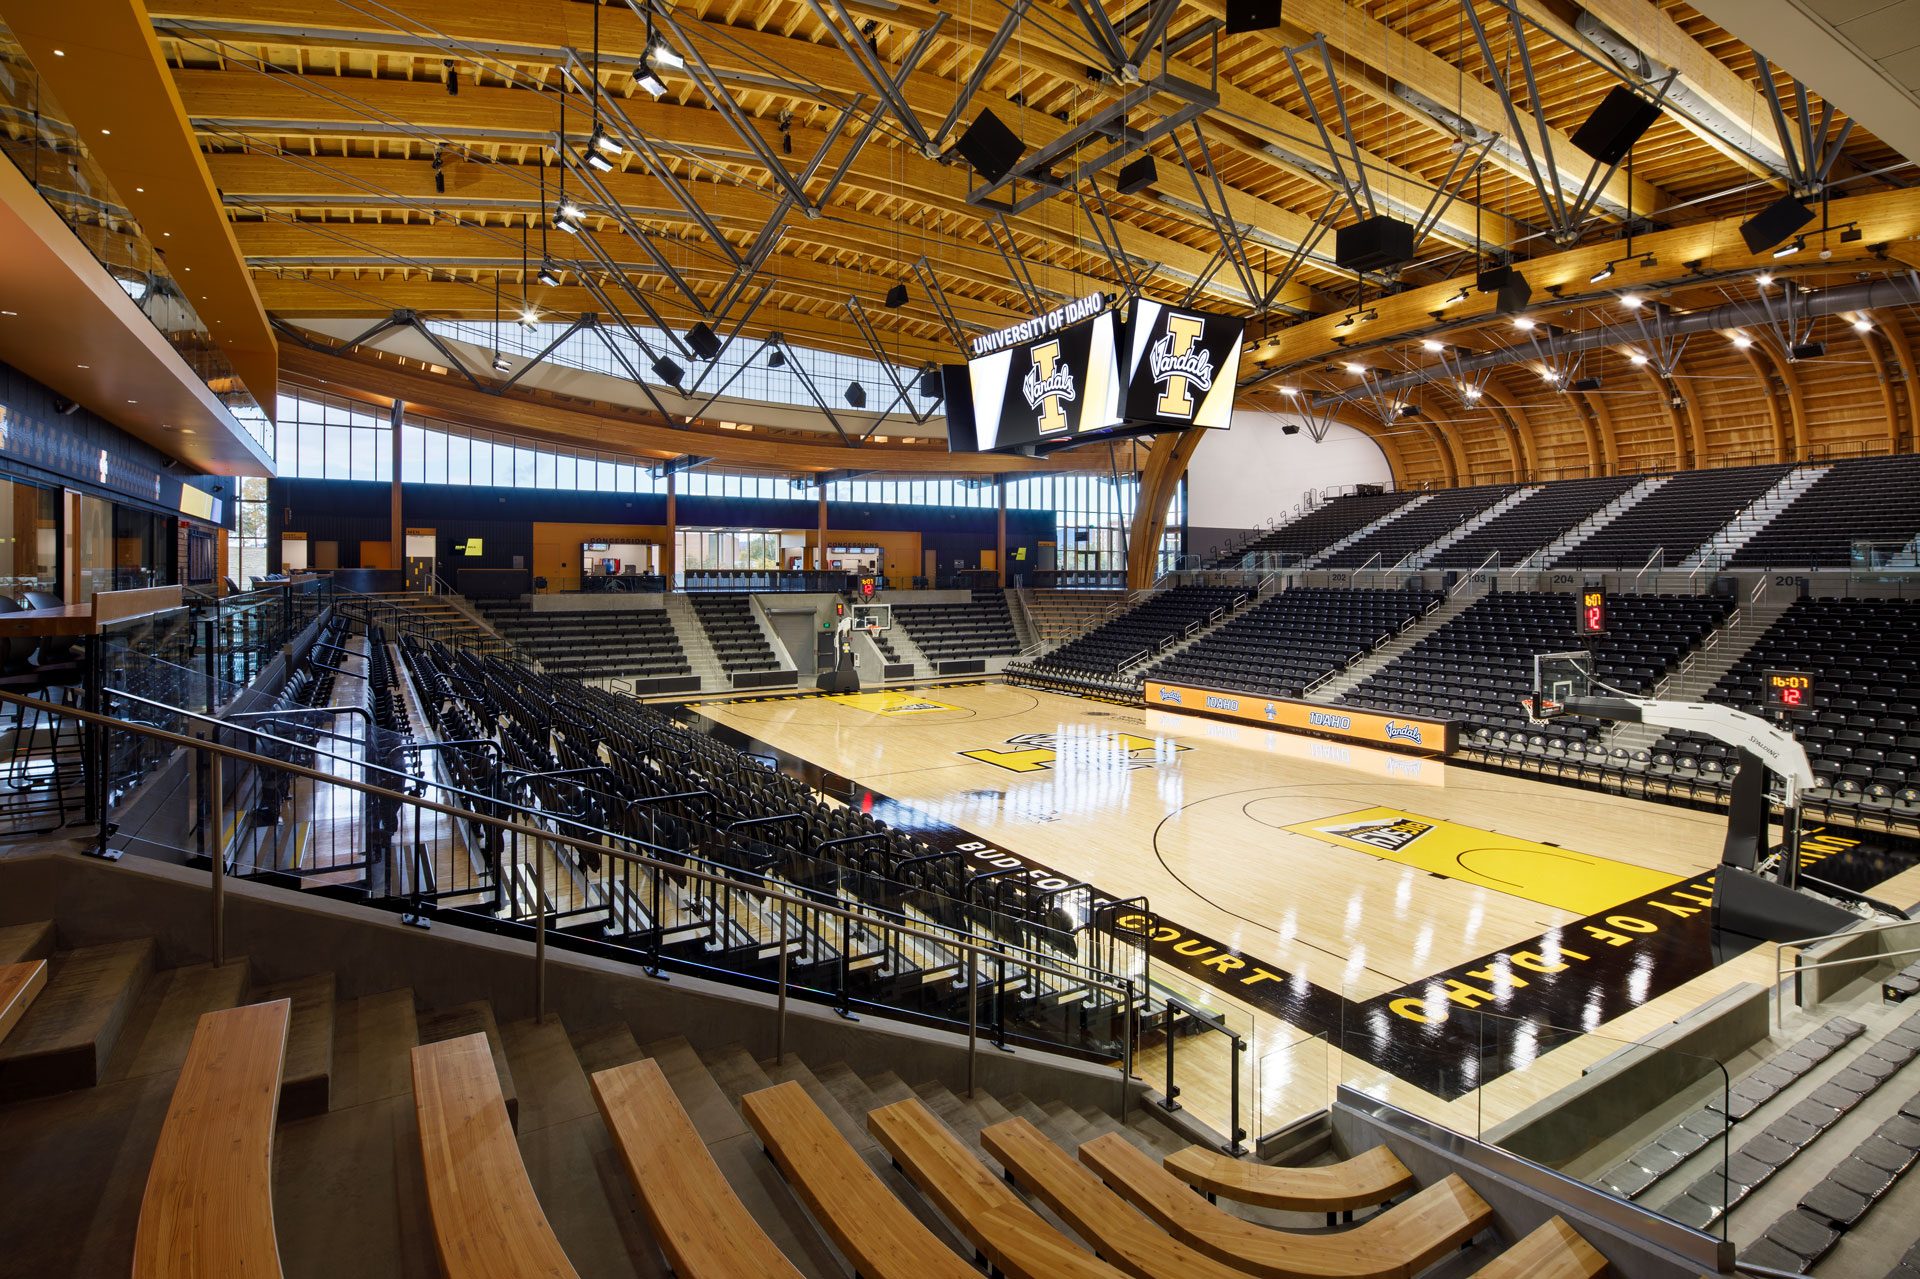 Idaho Central Credit Union Arena featured in sb Magazine's Sports Halls